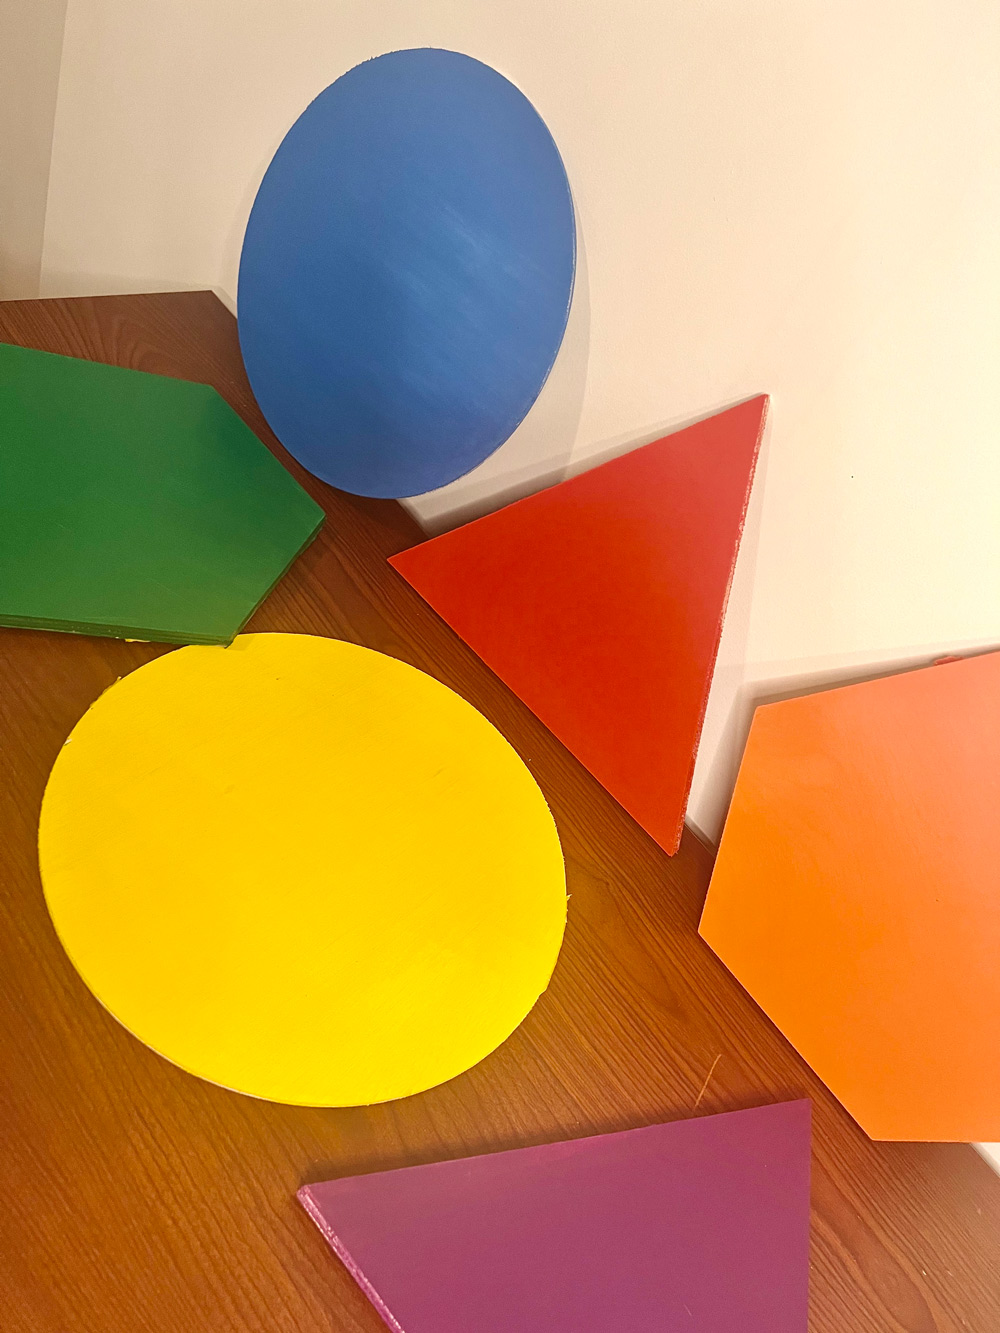 Six wooden shapes painted with various colors.